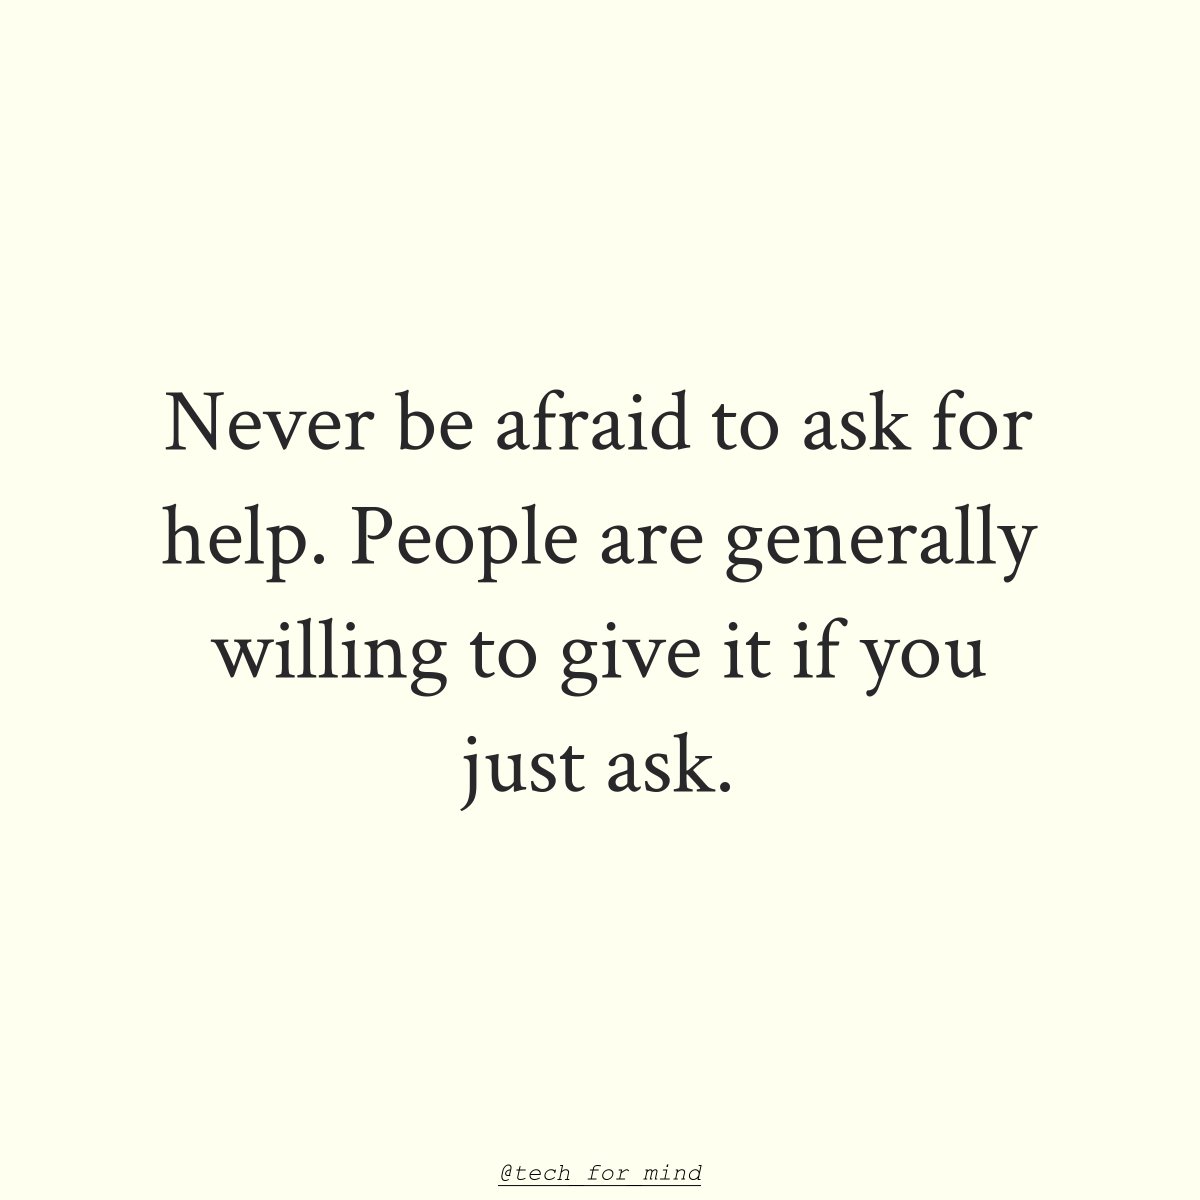 If you need help, will you be brave enough to ask for it? 🤔
#courage #support #growthmindset